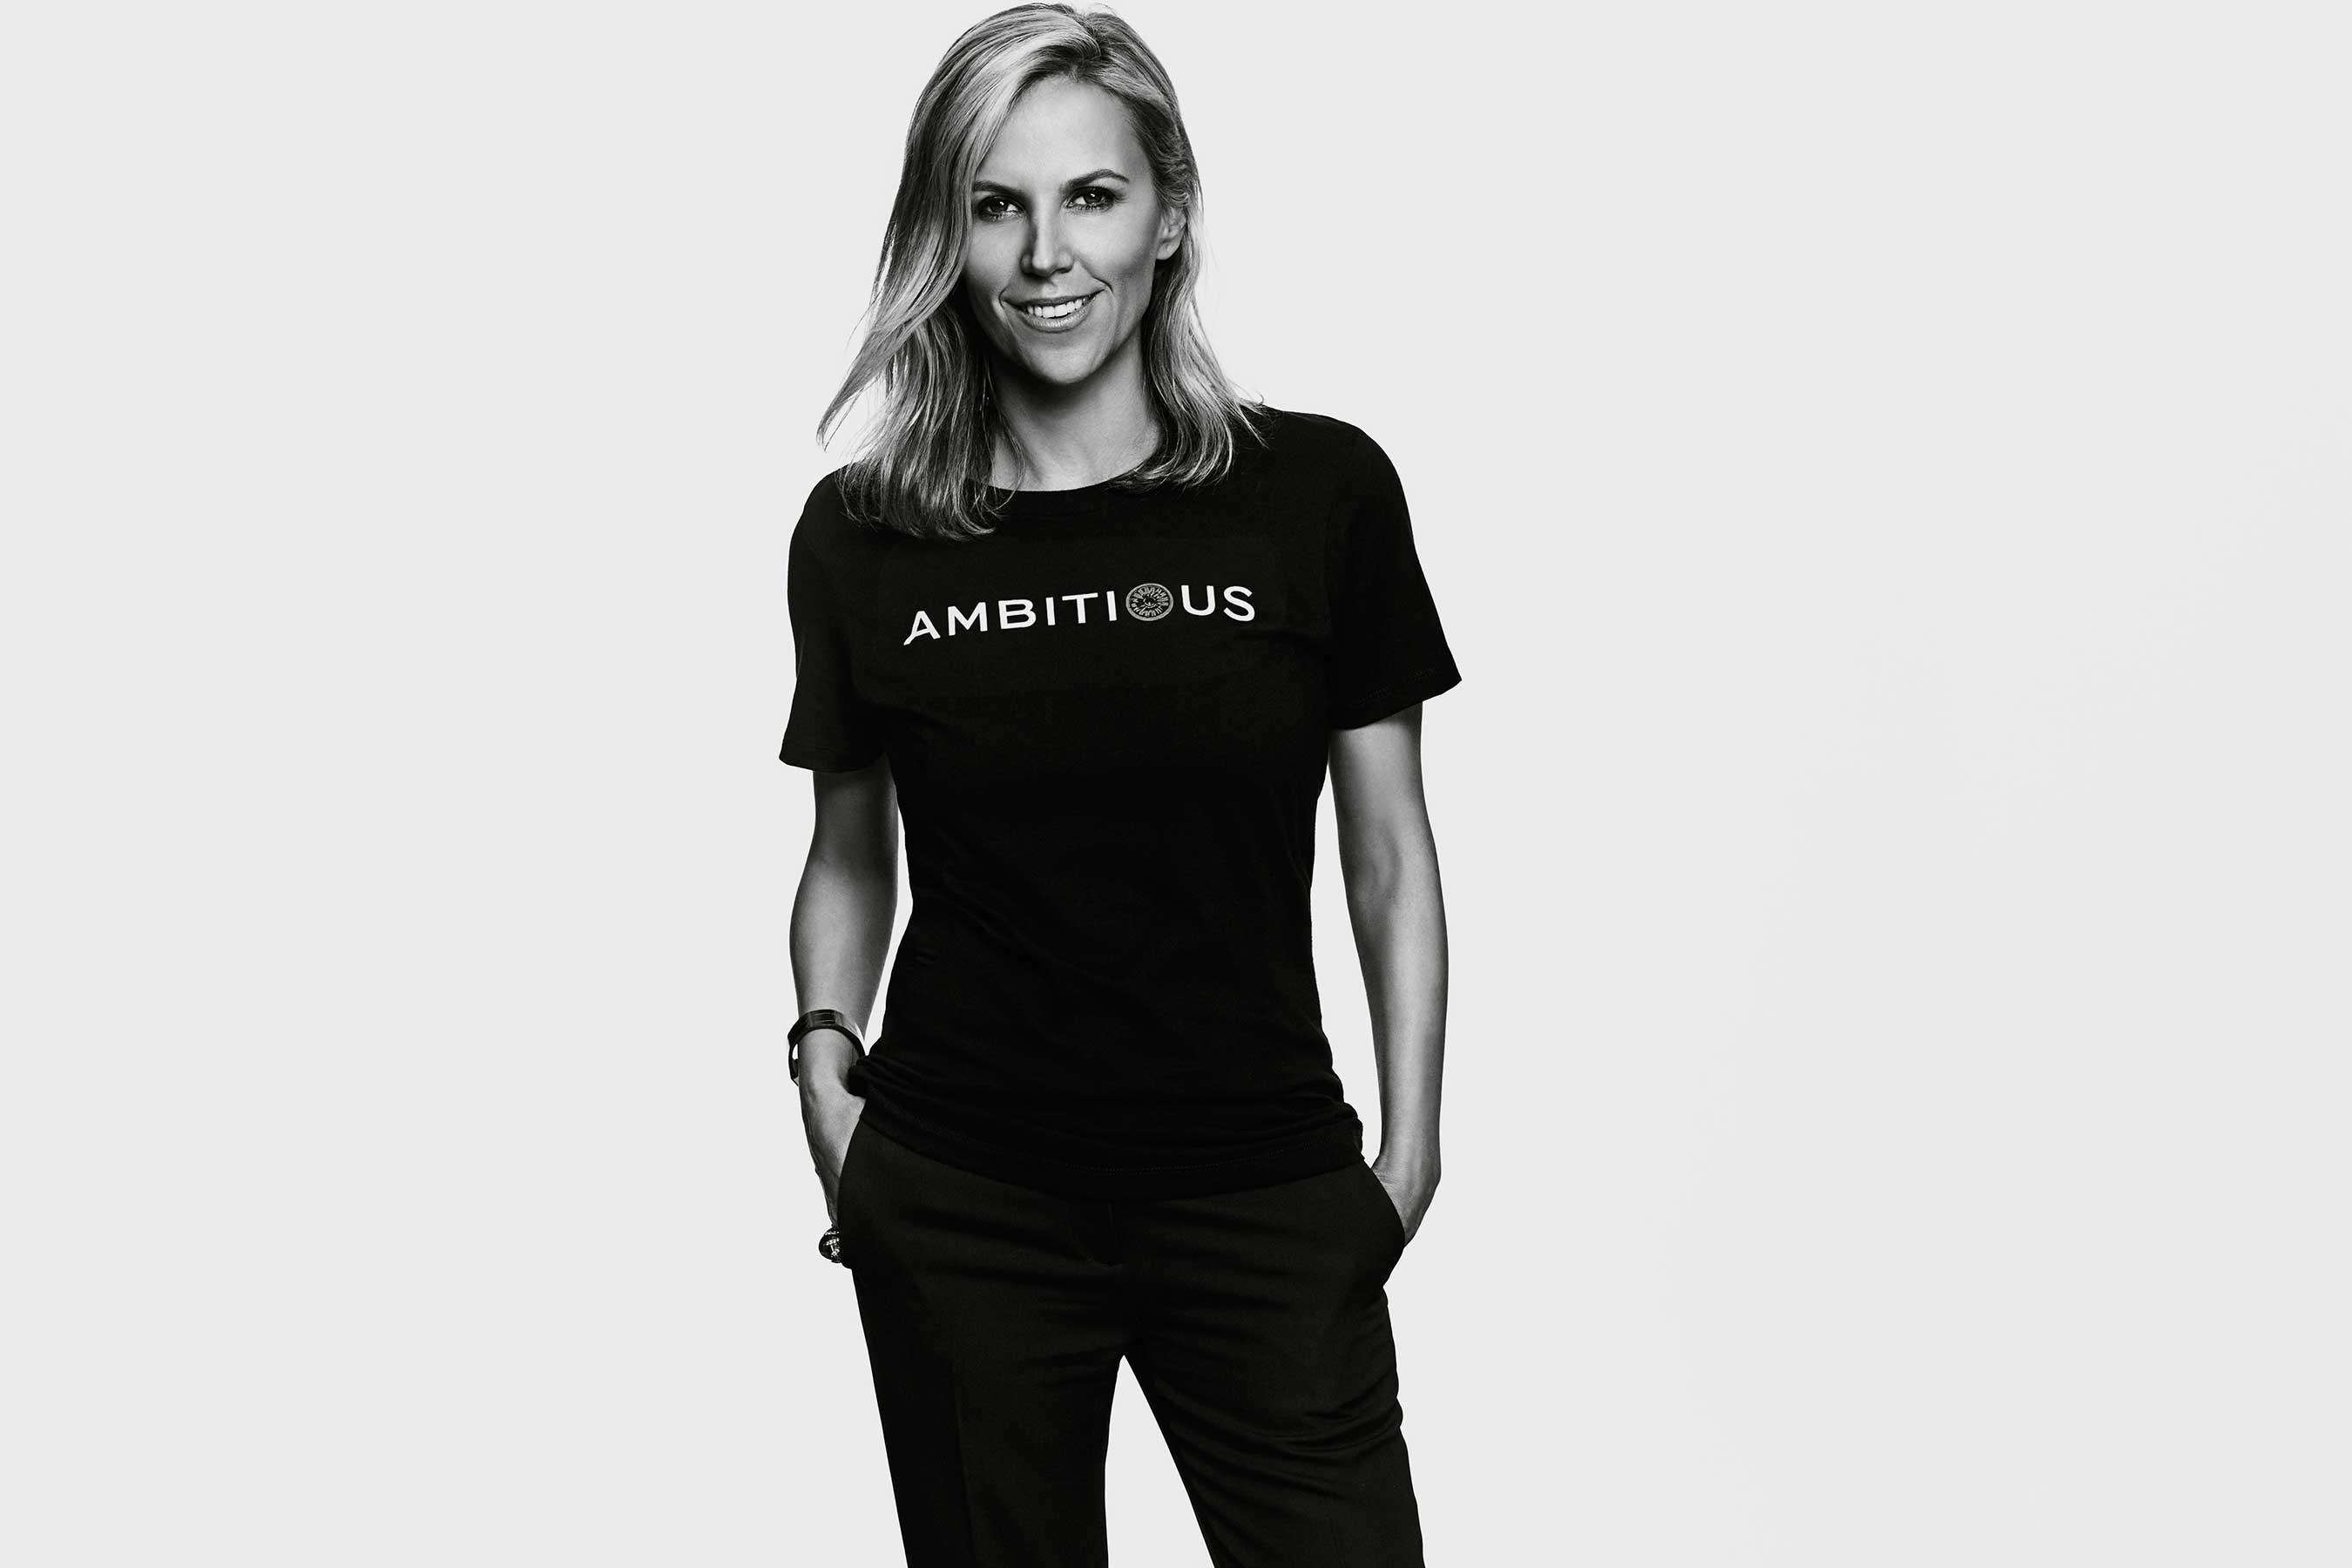 Tory Burch, founder of the Tory Burch Foundation, launched the #EmbraceAmbition campaign on International Women’s Day to encourage women to embrace ambition.